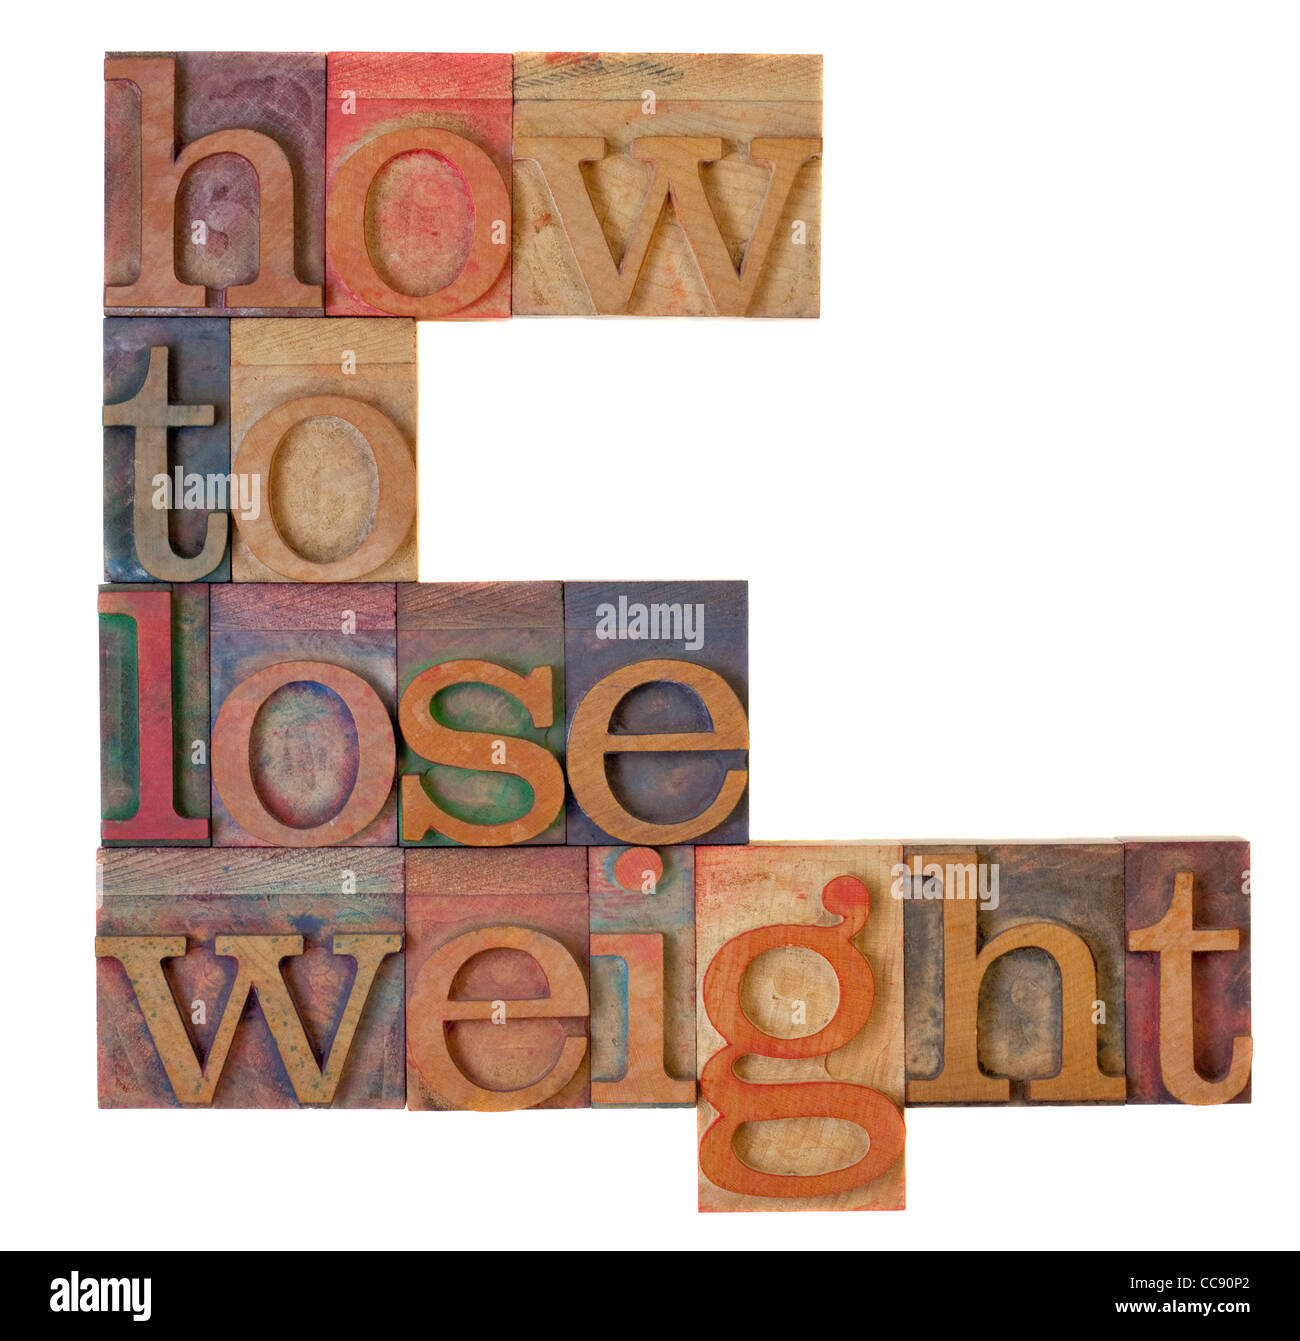 how to loose weight headline in vintage wooden letterpress type blocks, stained by color ink, isolated on white Stock Photo